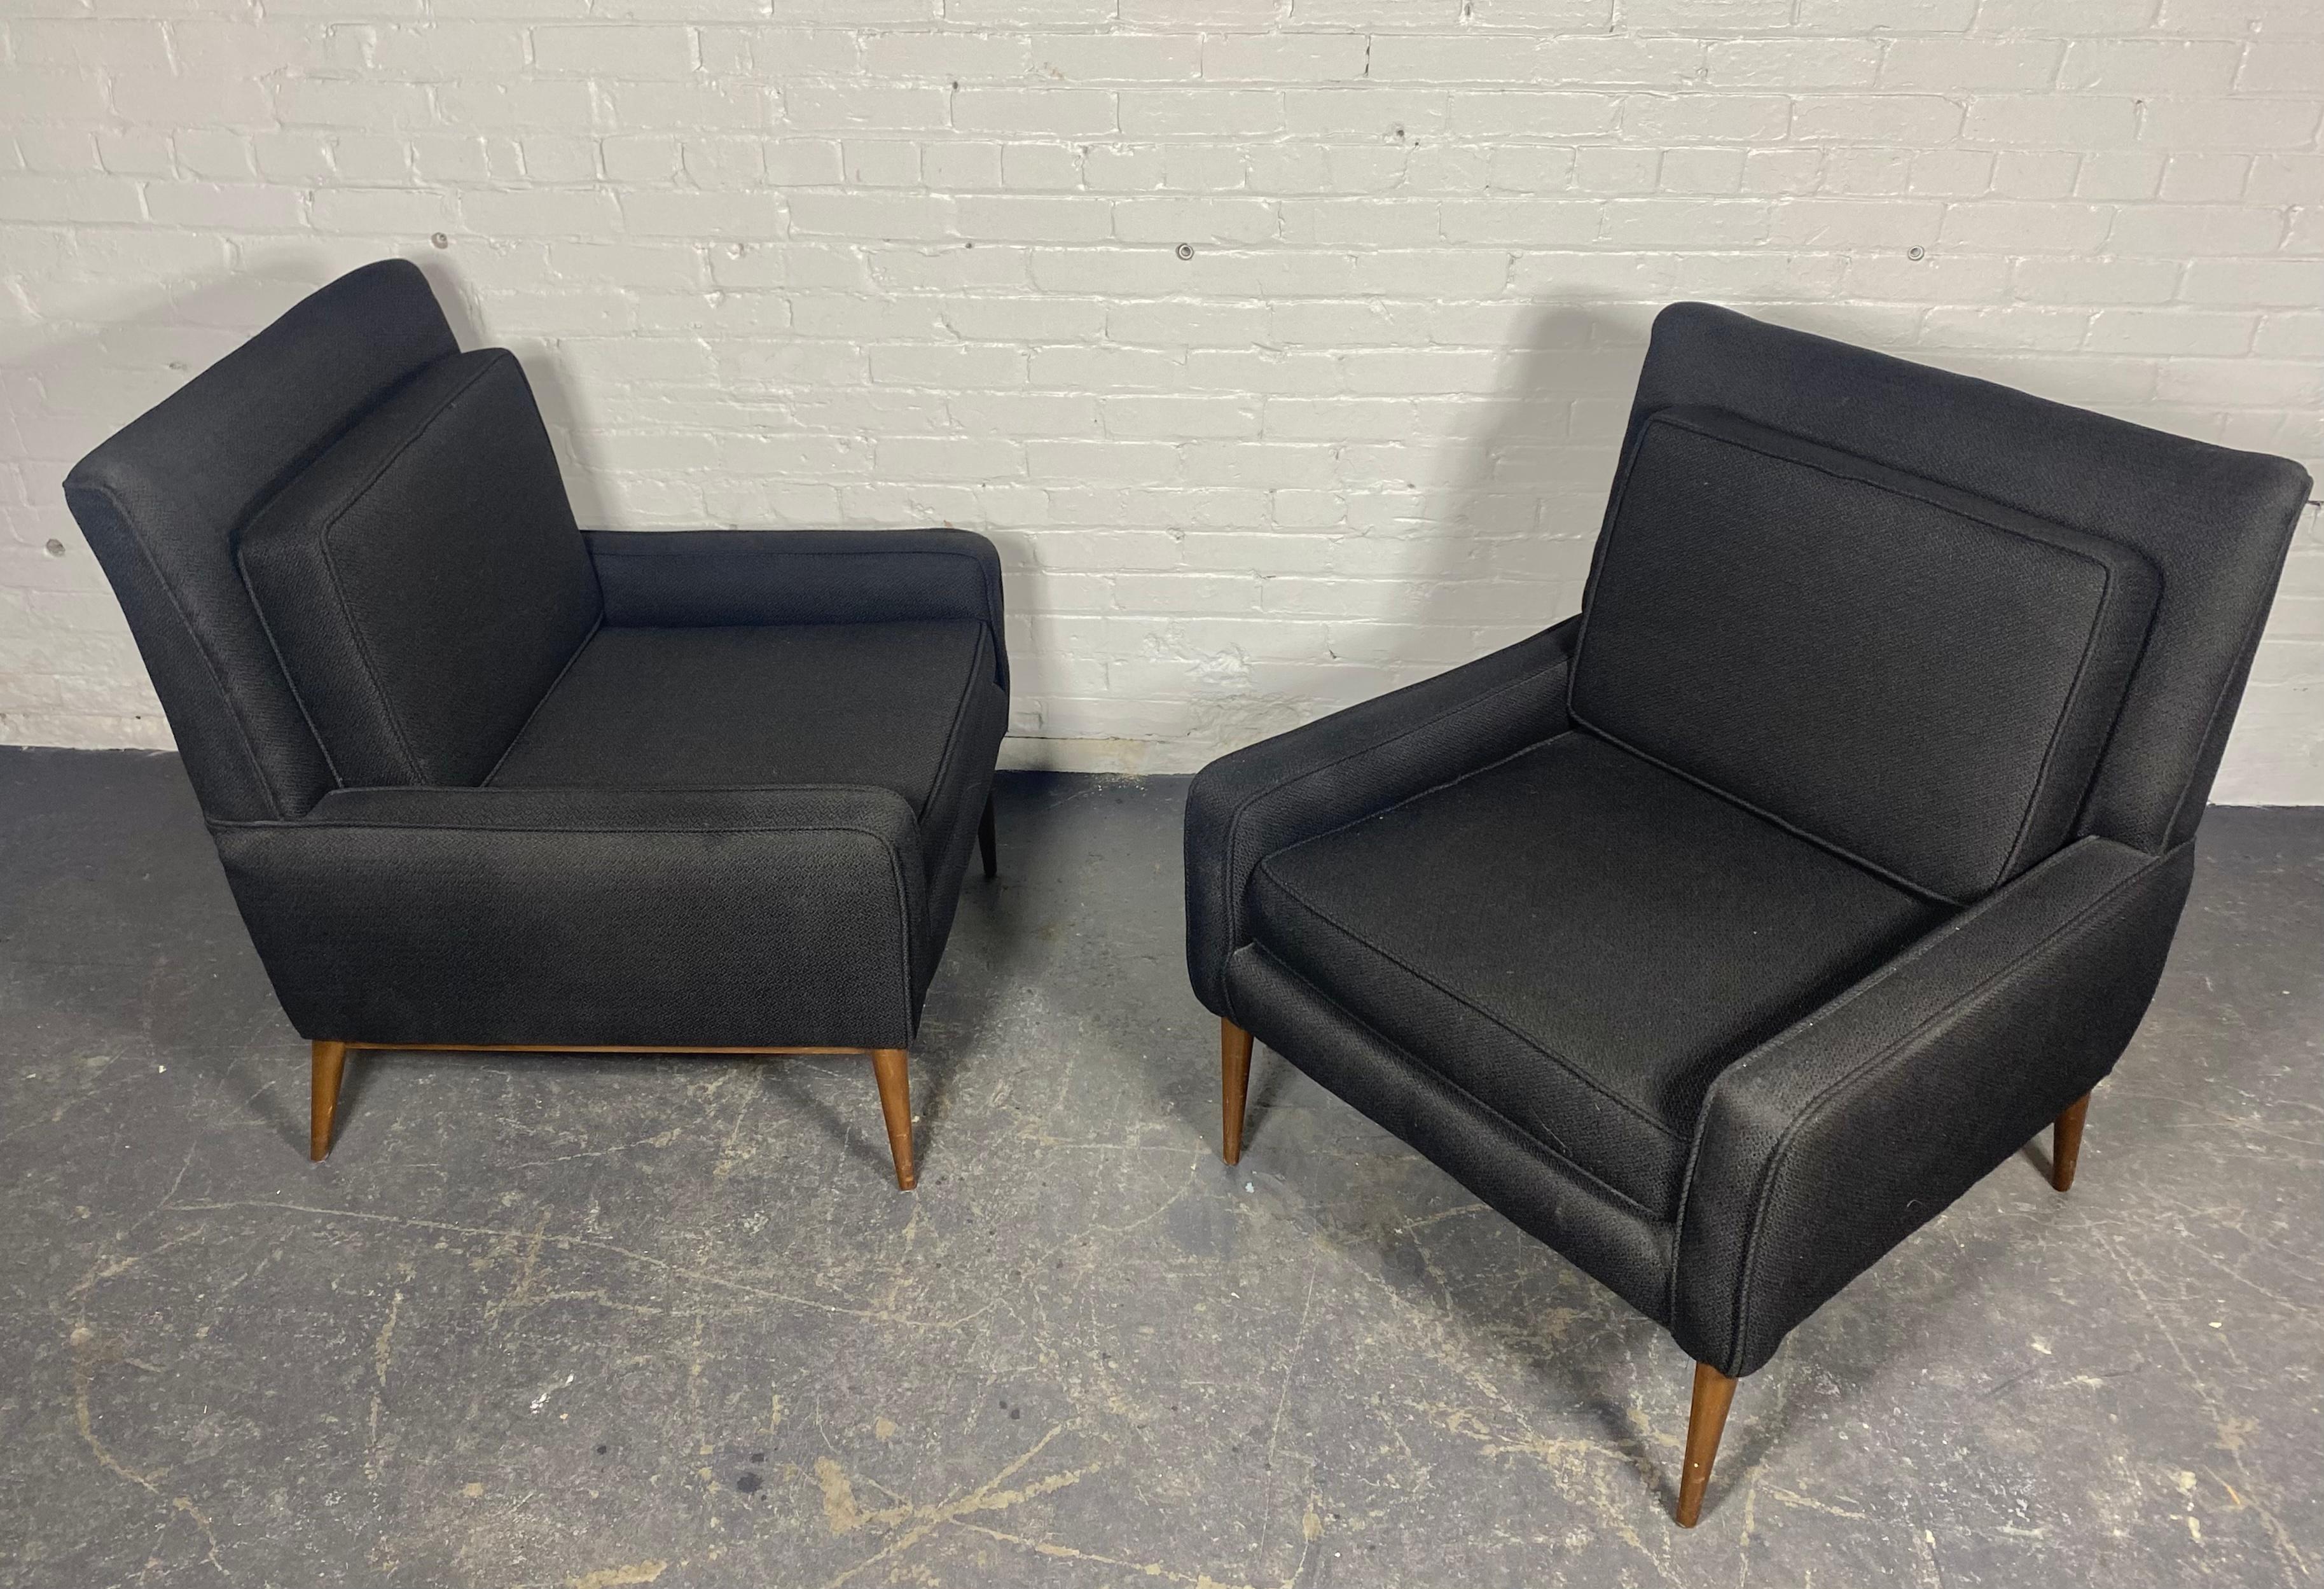 Classic Pair Modernist Lounge Chairs attributed to Paul McCobb / Directional In Good Condition For Sale In Buffalo, NY